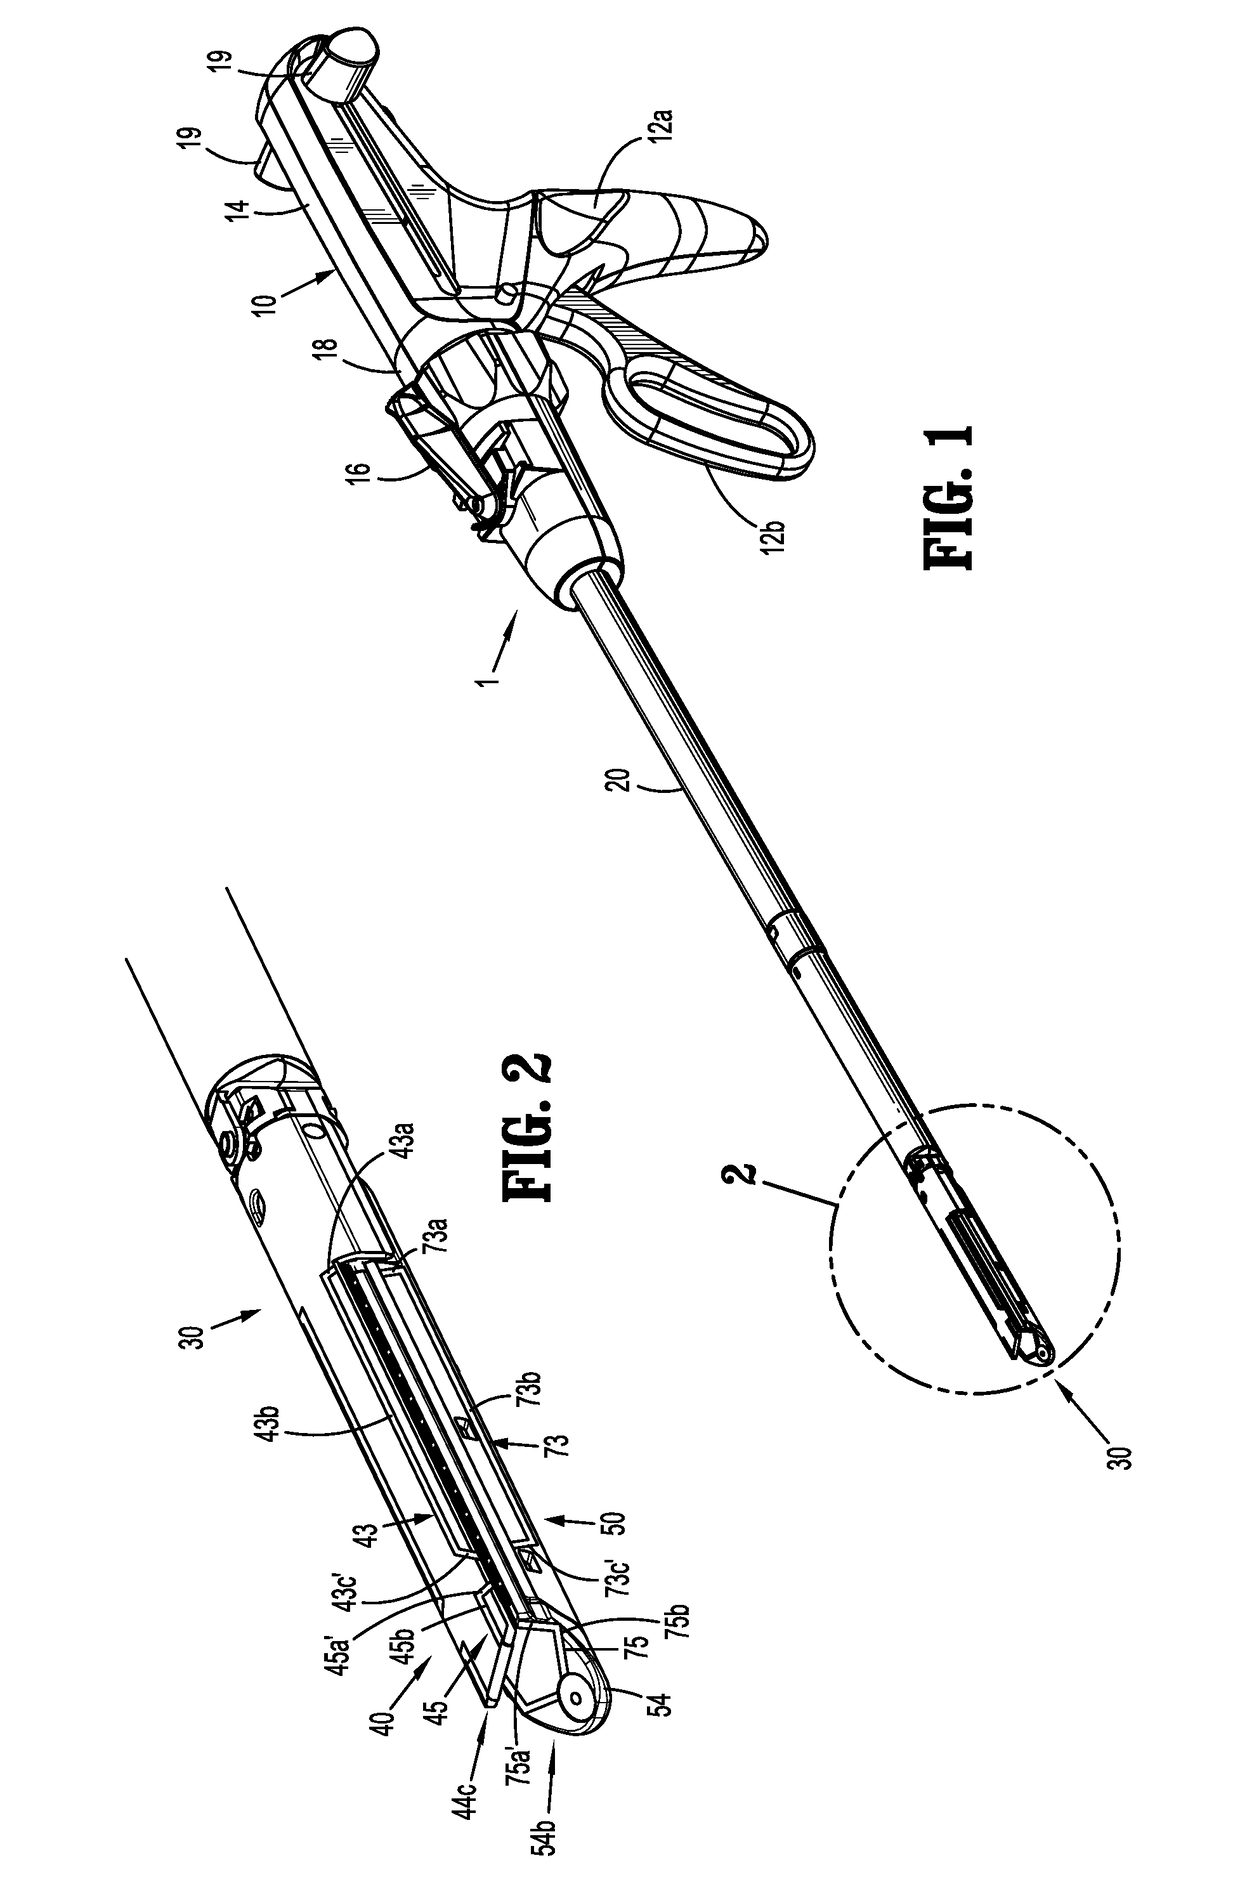 Surgical buttress retention systems for surgical stapling apparatus